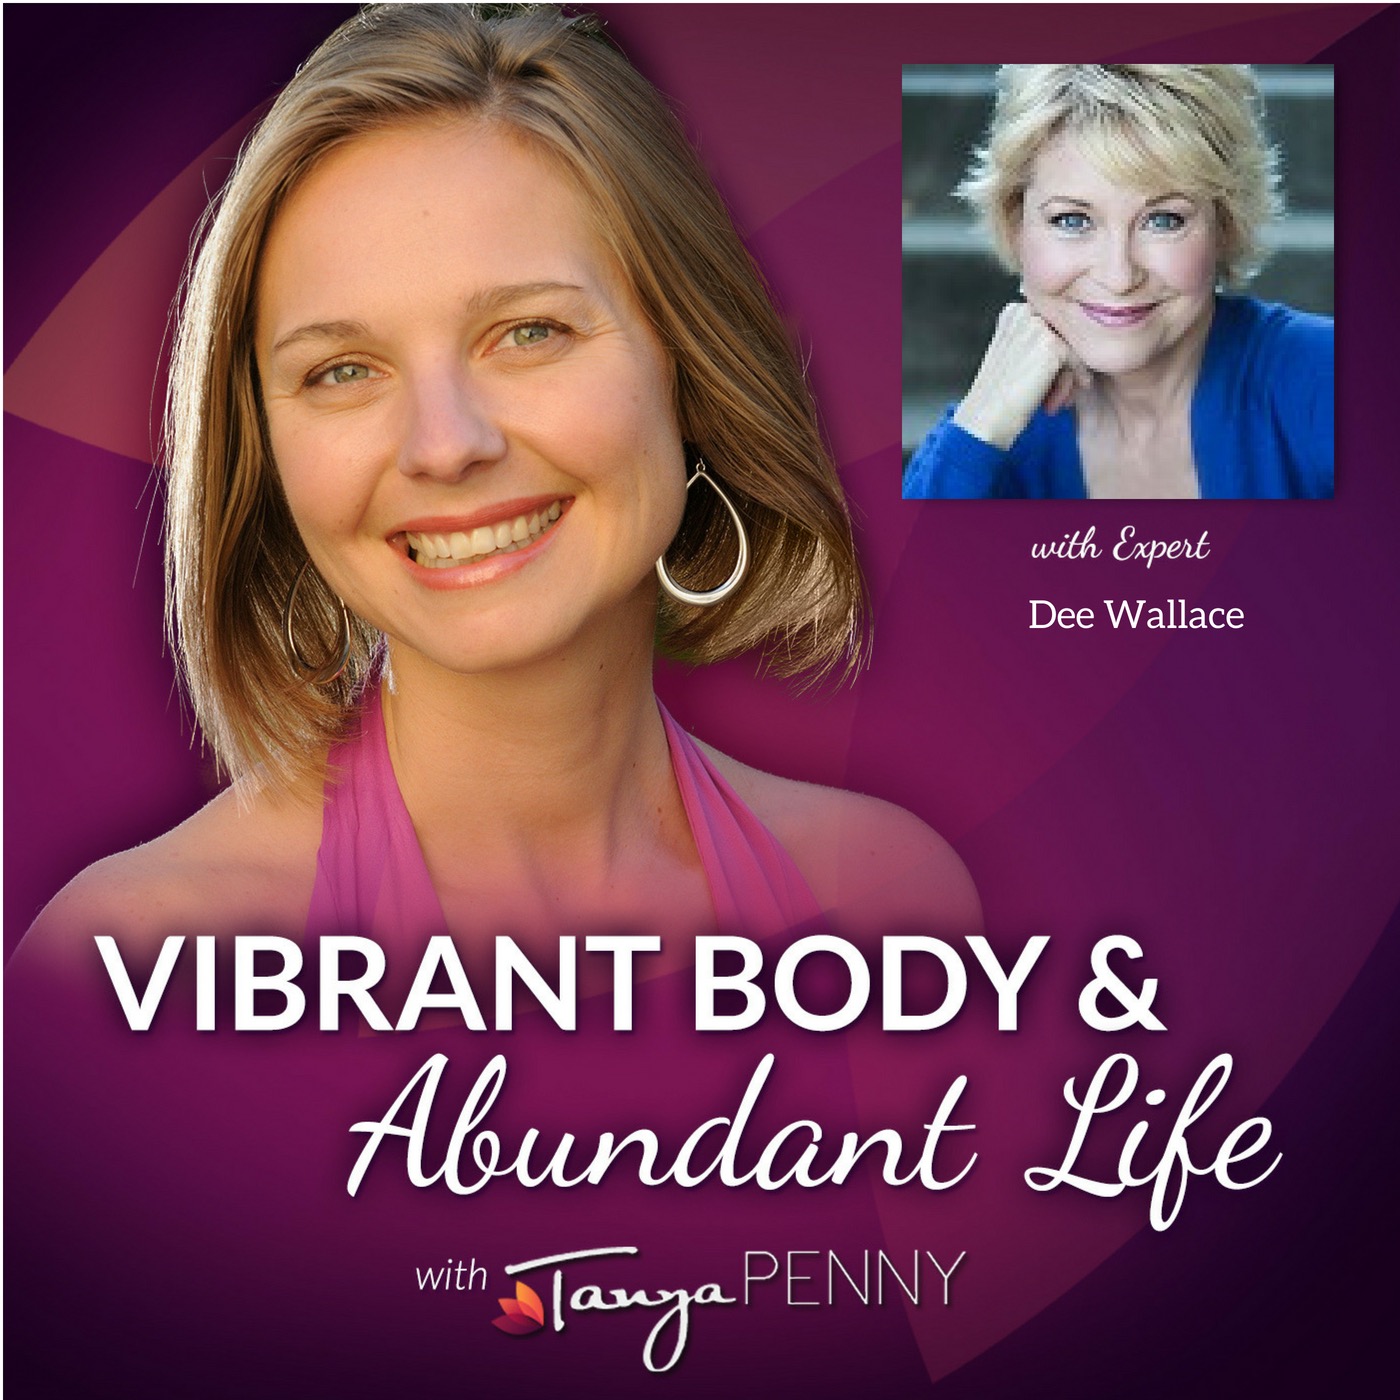 Cultivate Self-Love & Worth with Dee Wallace